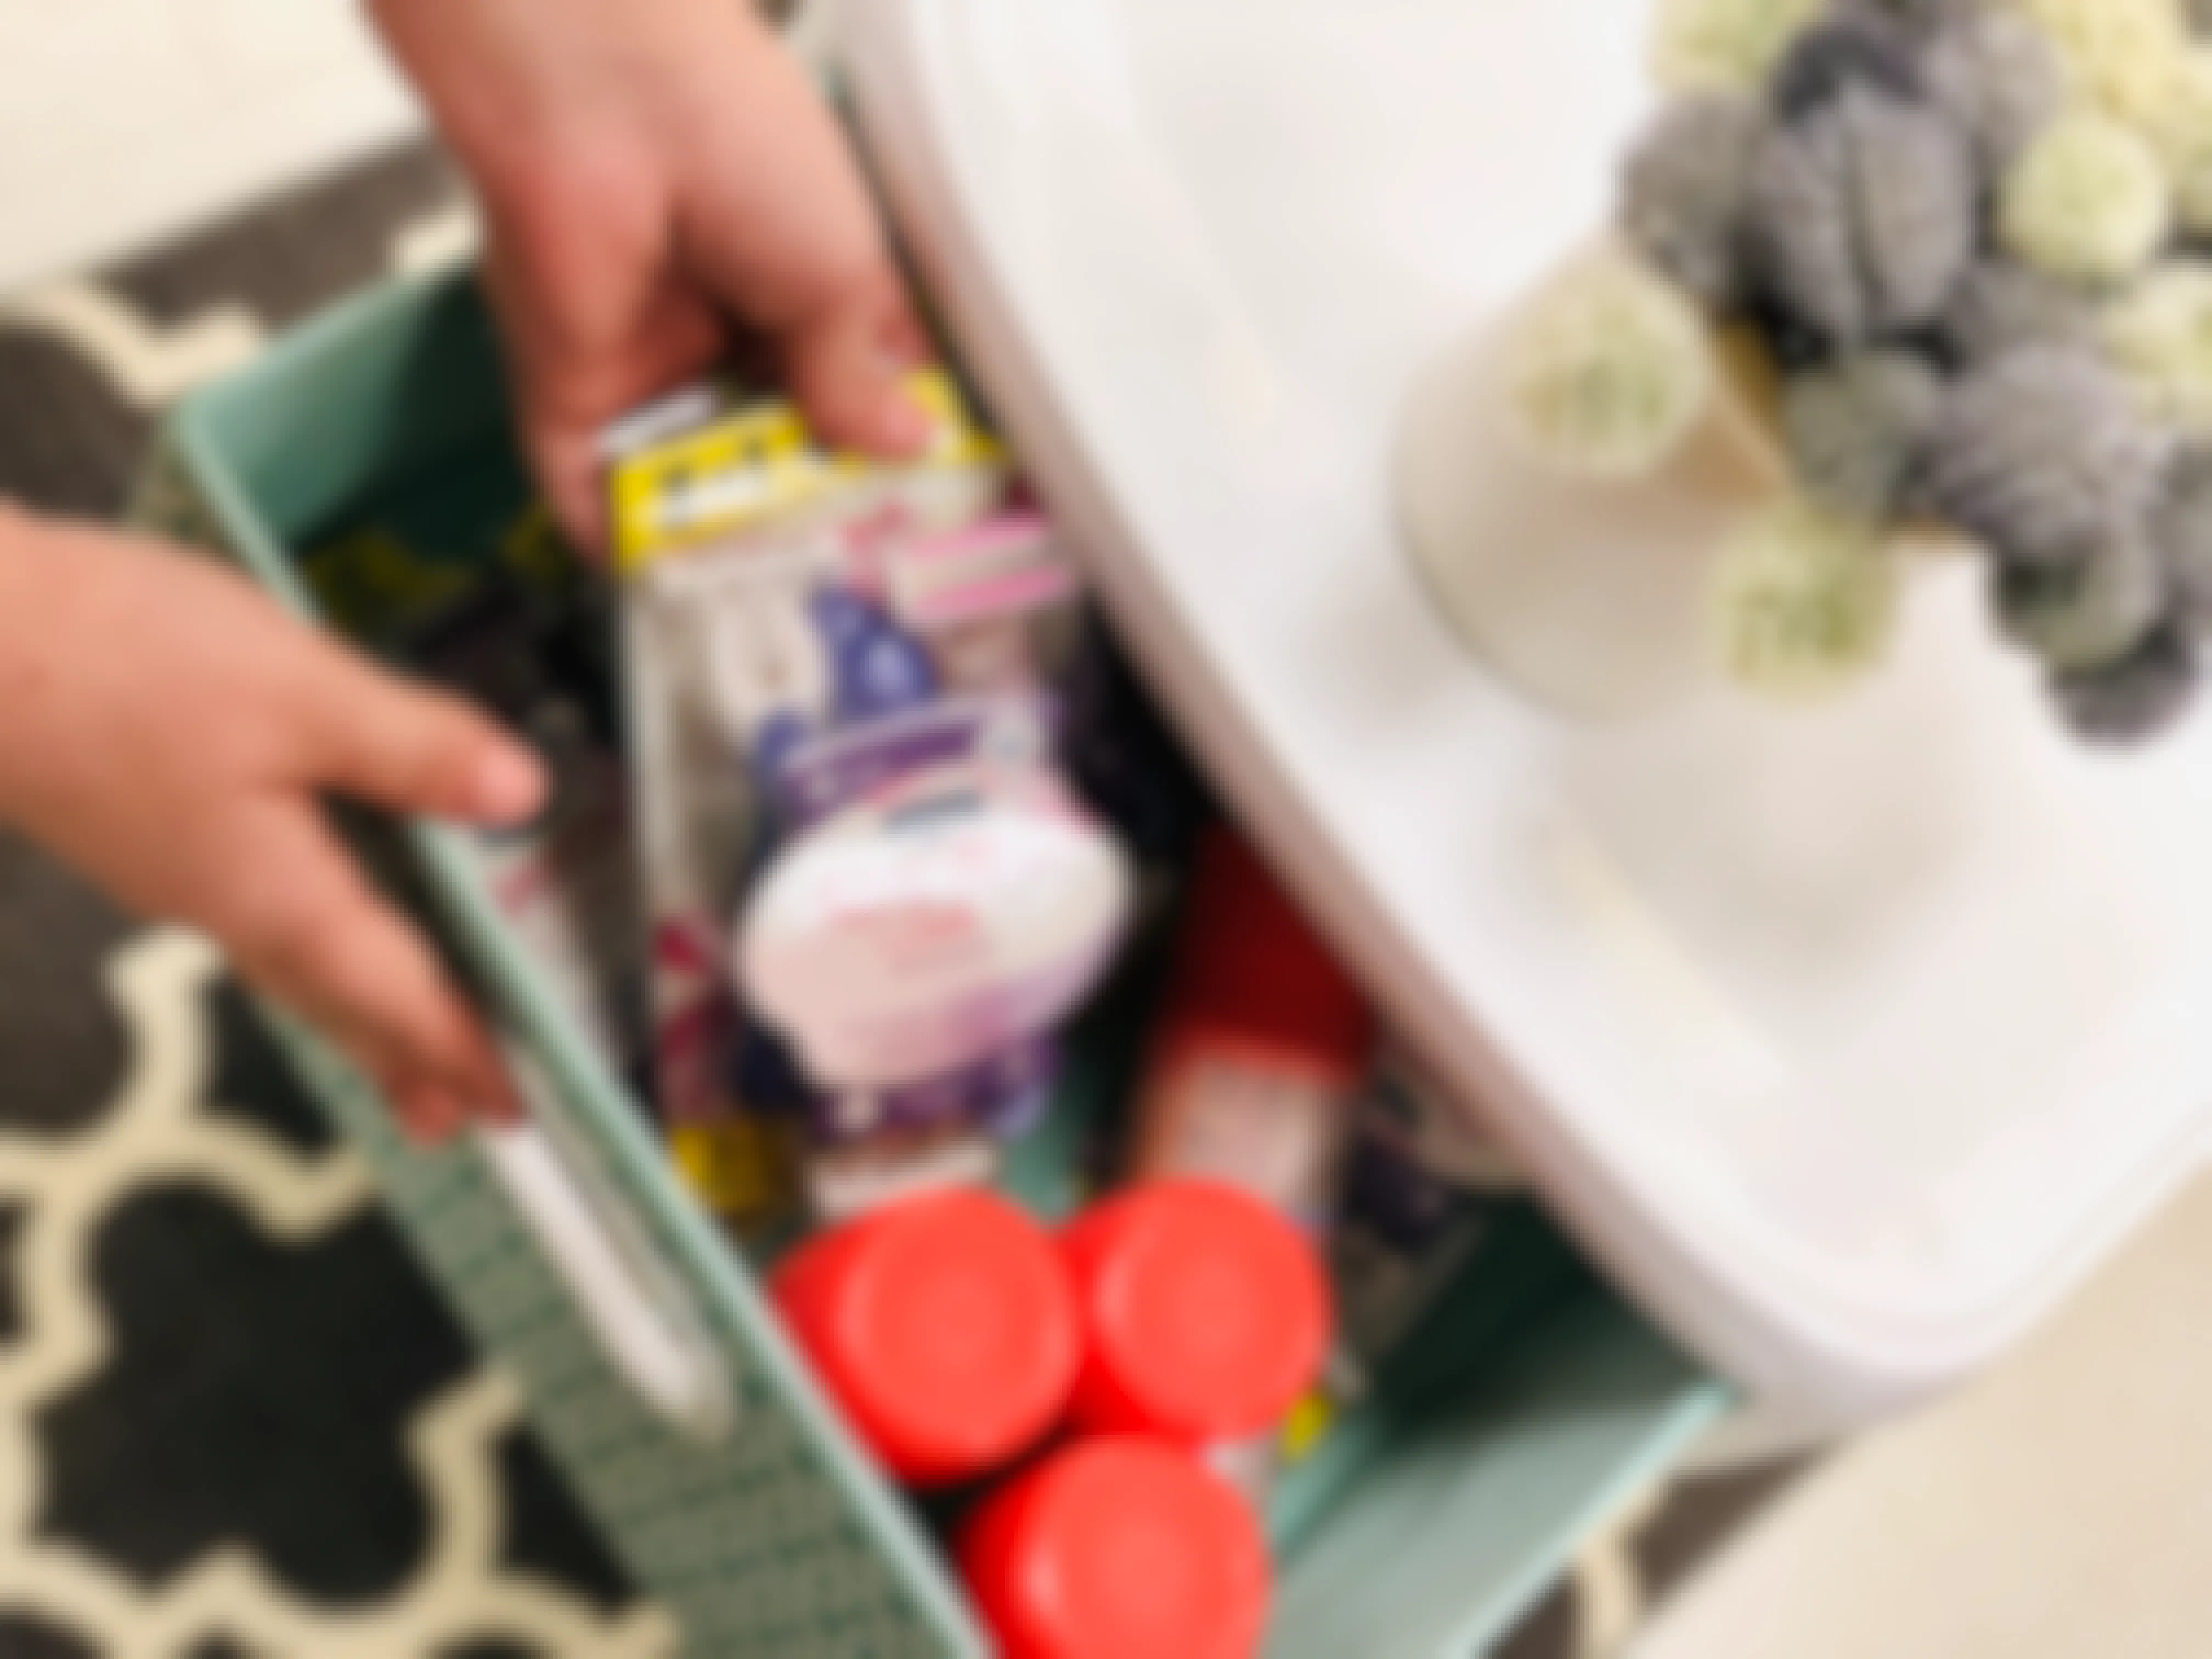 13 Personal Care Items You Can Stockpile Without Being a Hoarder